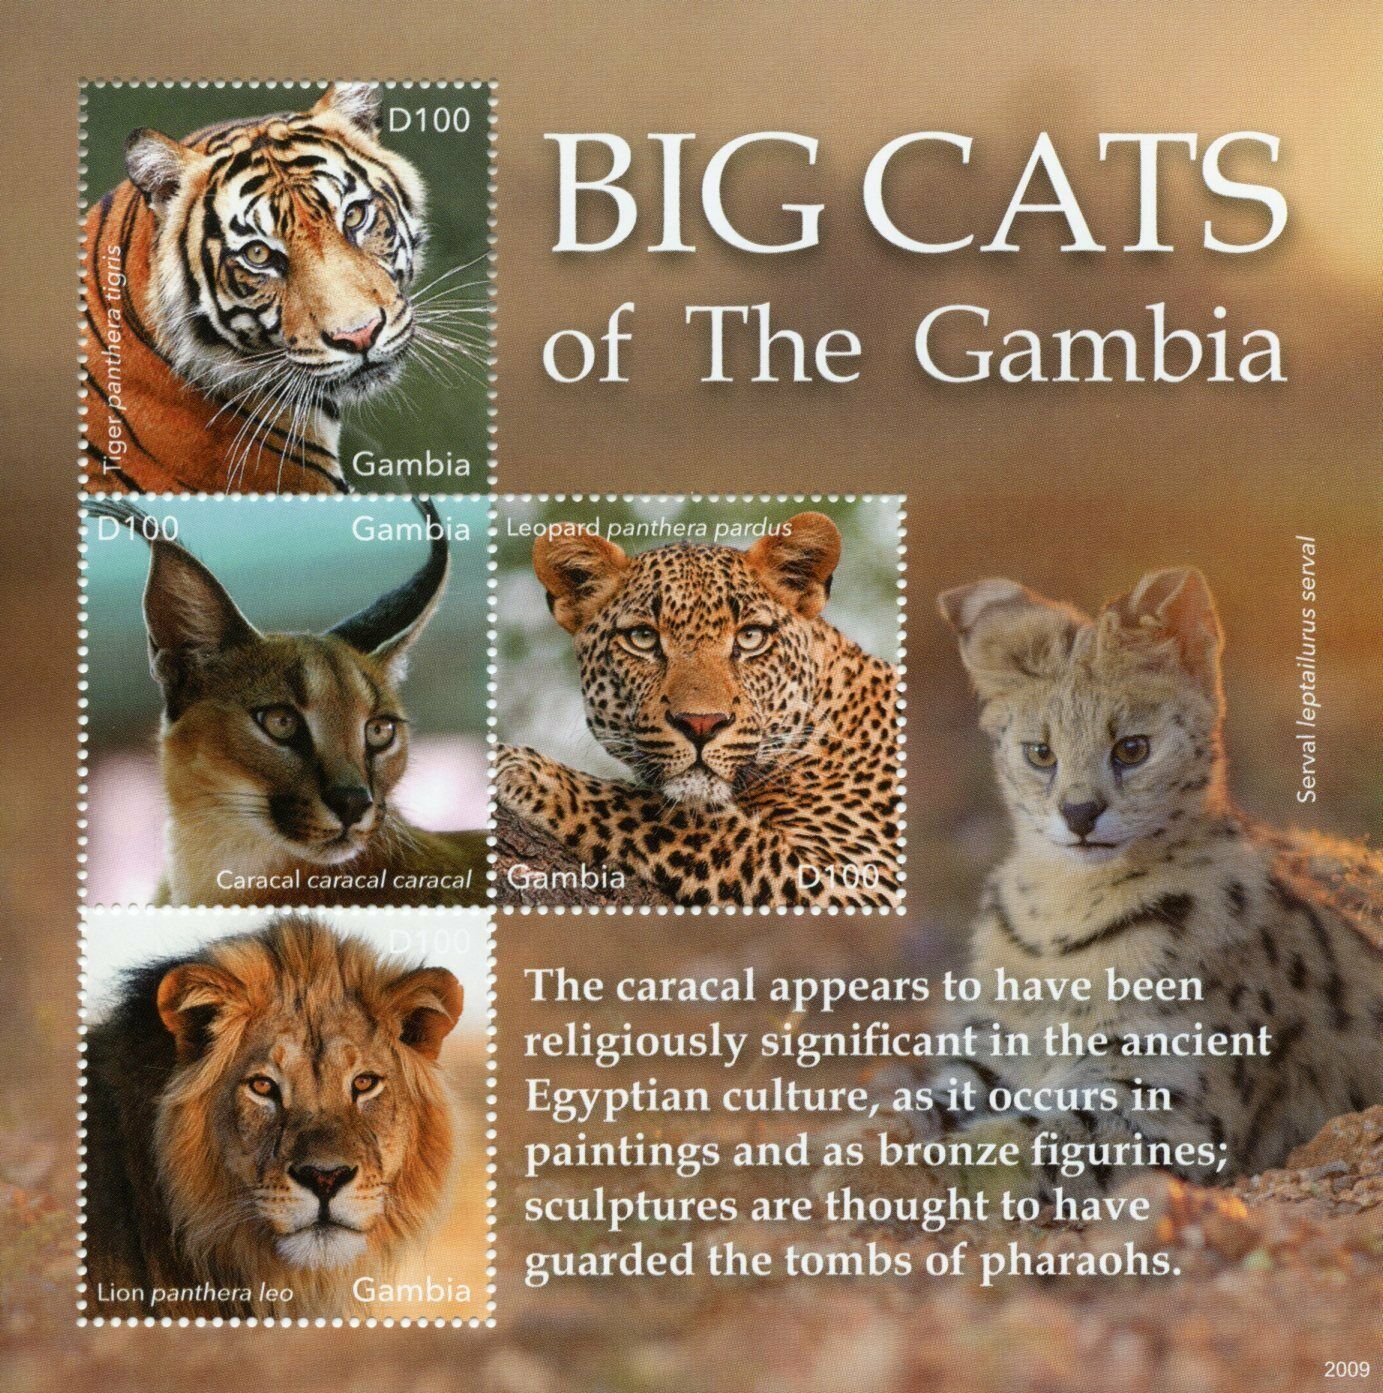 Gambia 2020 MNH Wild Animals Stamps Big Cats Tigers Lions Leopards Fauna 4v M/S